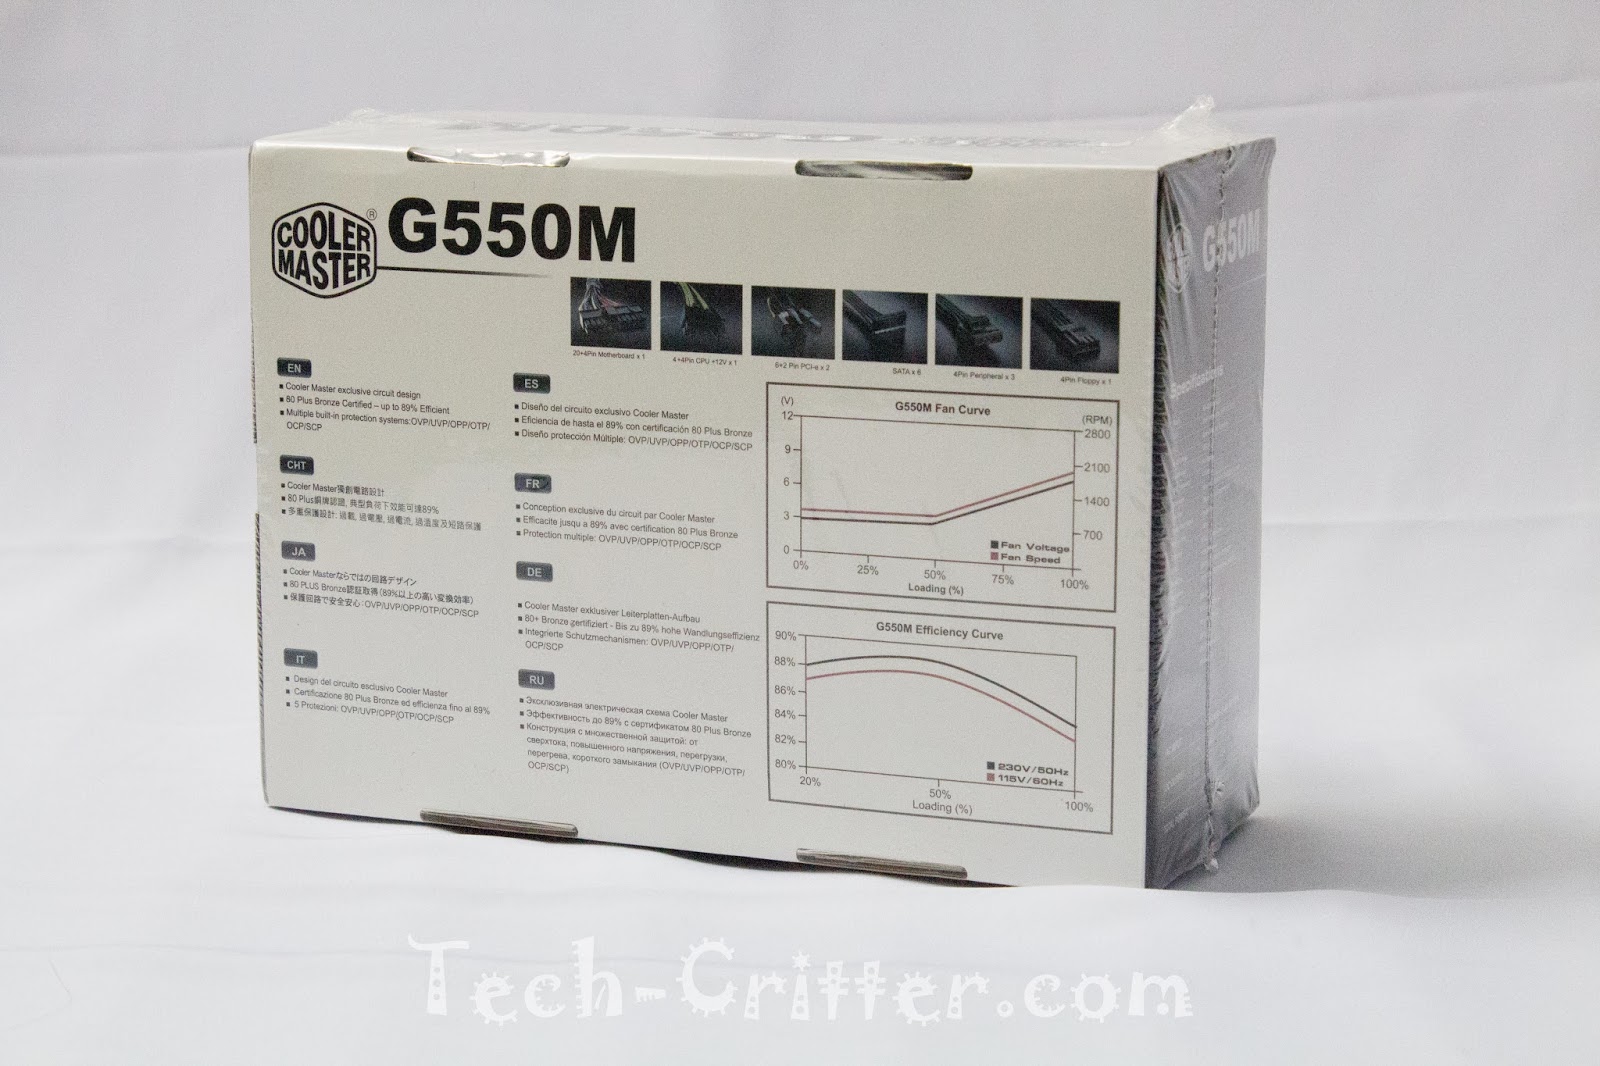 Cooler Master G550M Power Supply Unit Unboxing and Overview 8